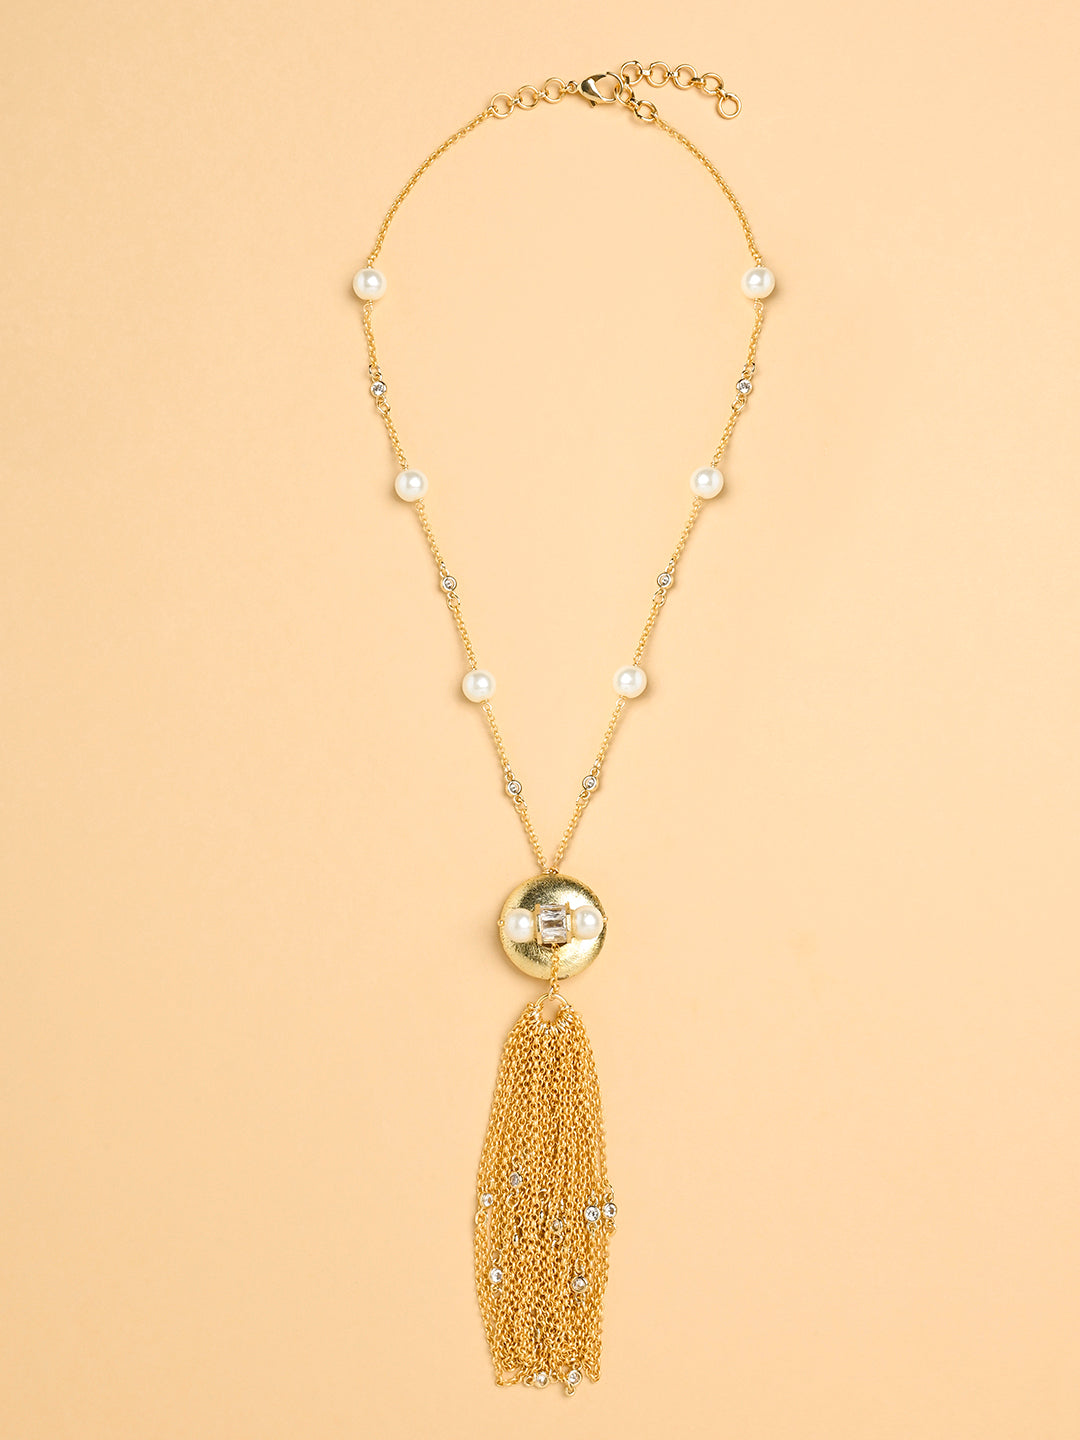 Amama,Chain Shower Necklace